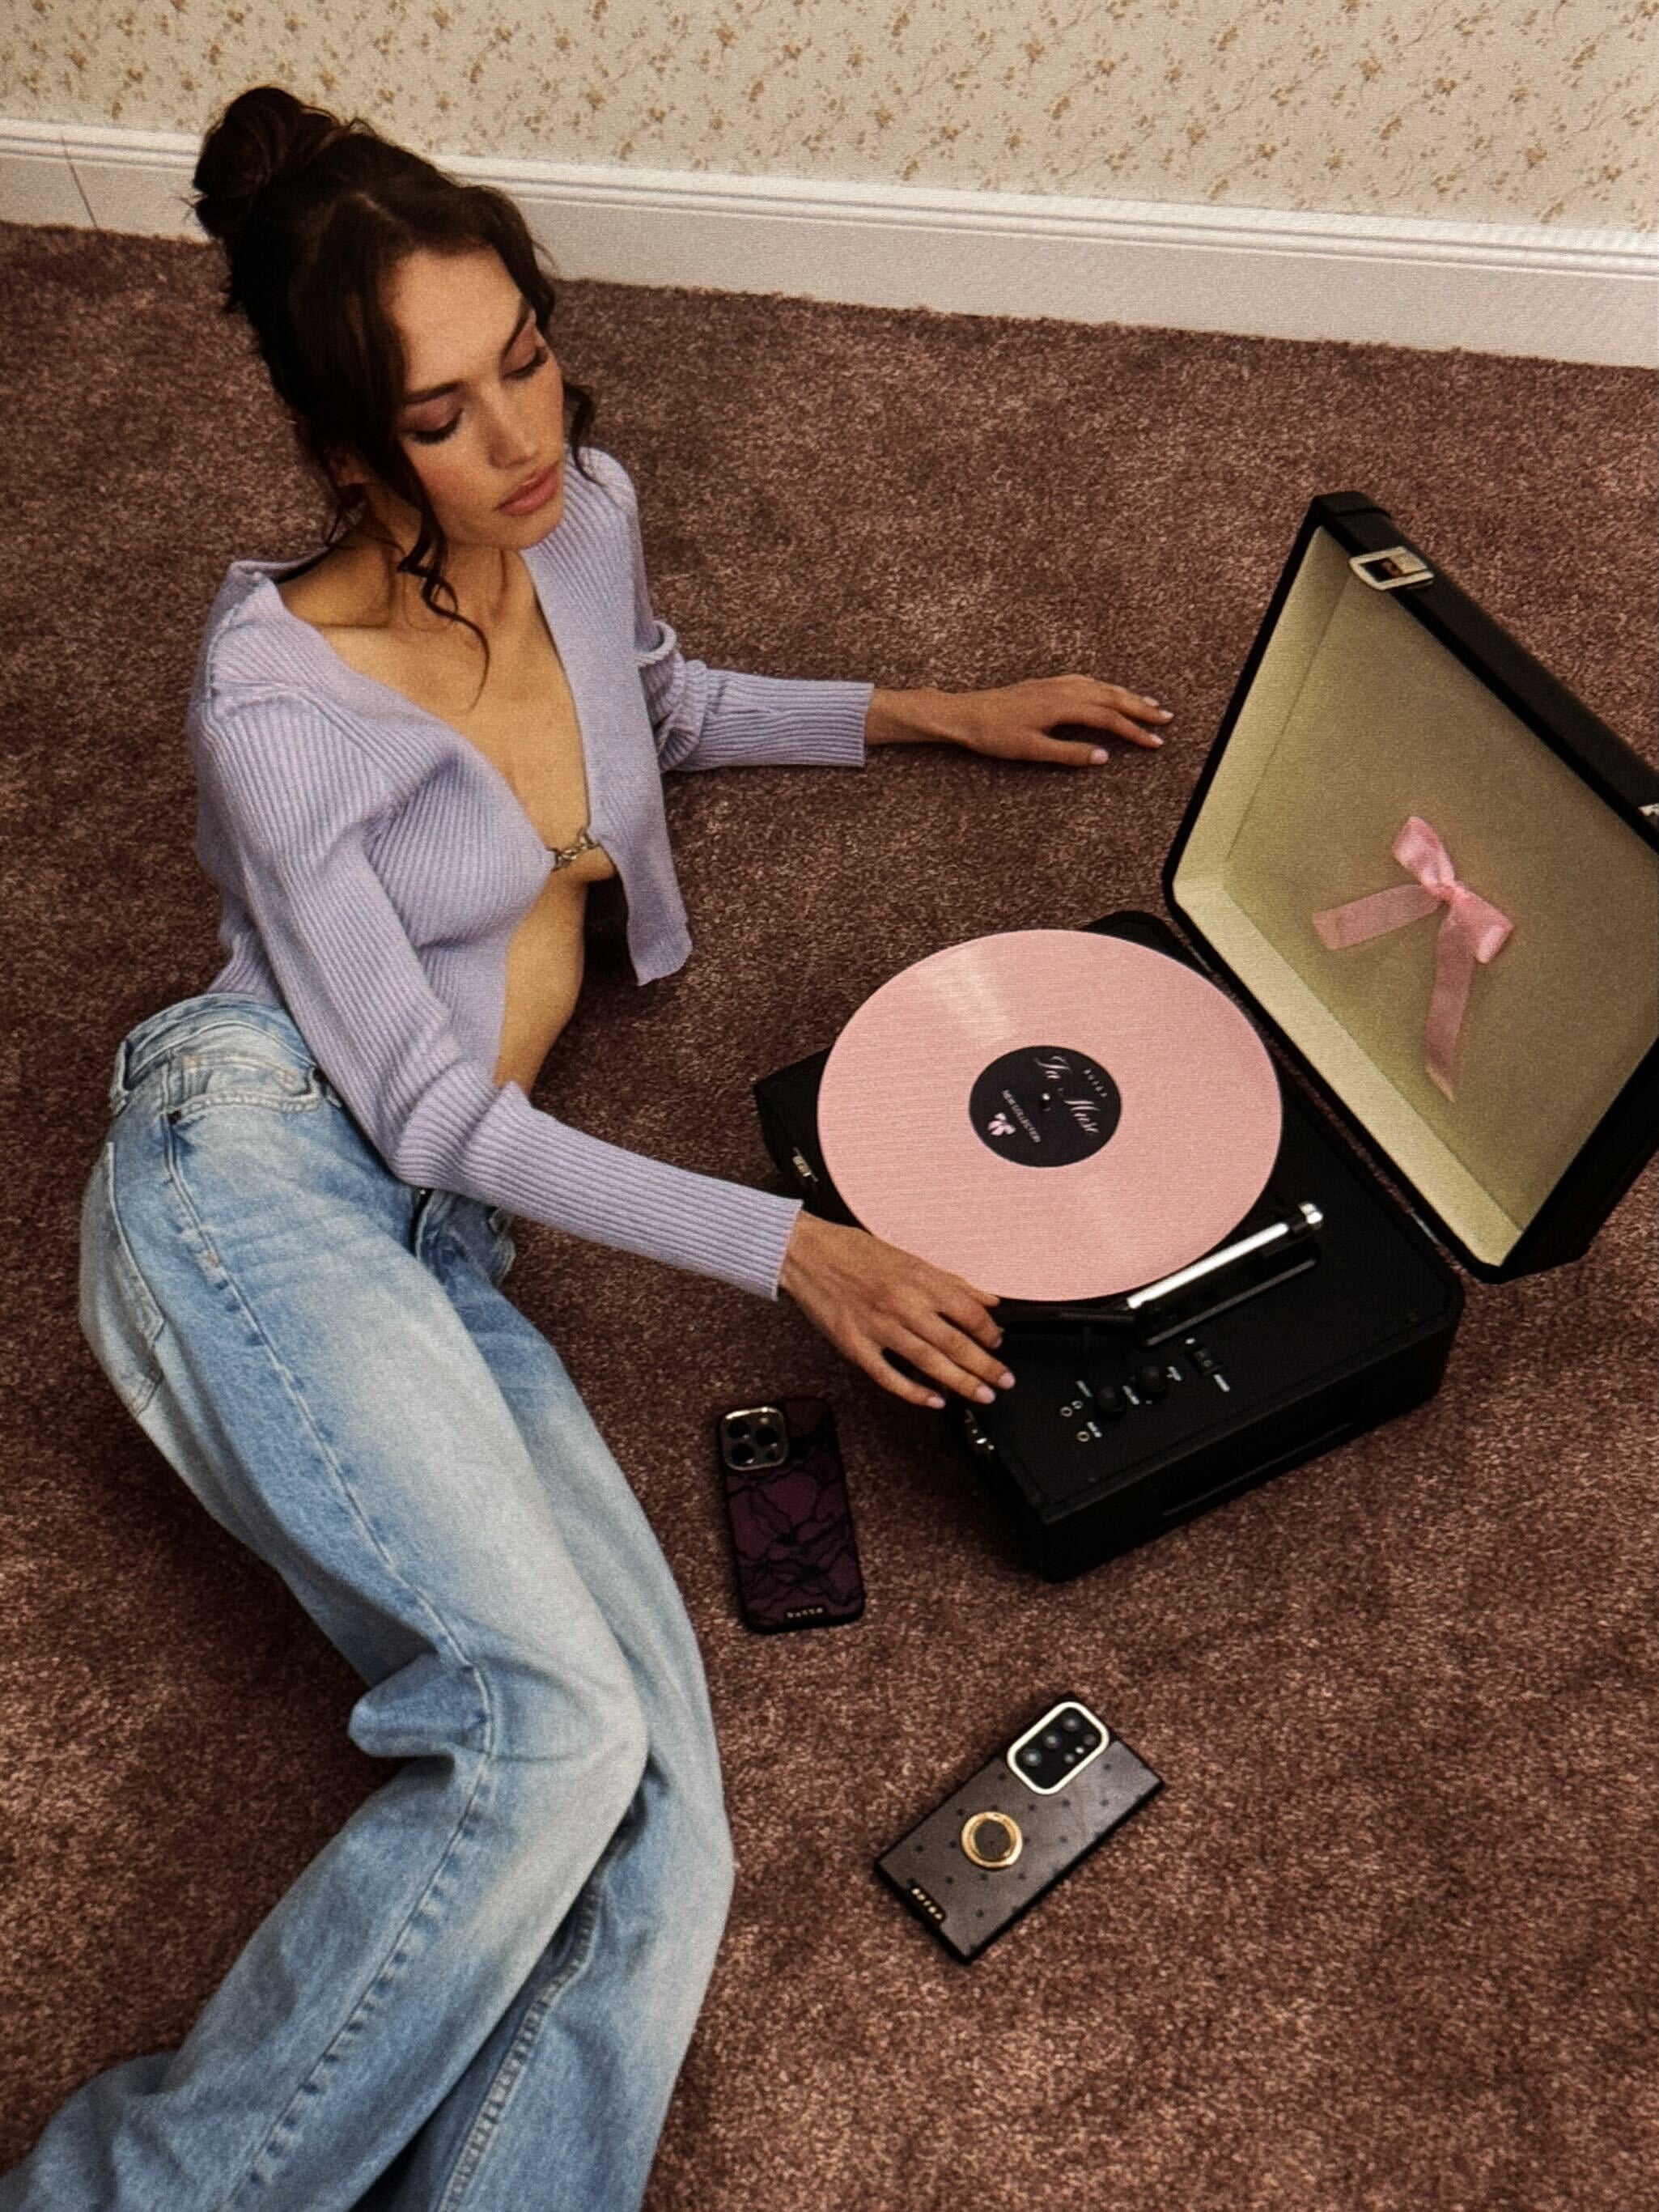 Woman relaxing on the floor with a pink record player, phones featuring BURGA cases nearby.